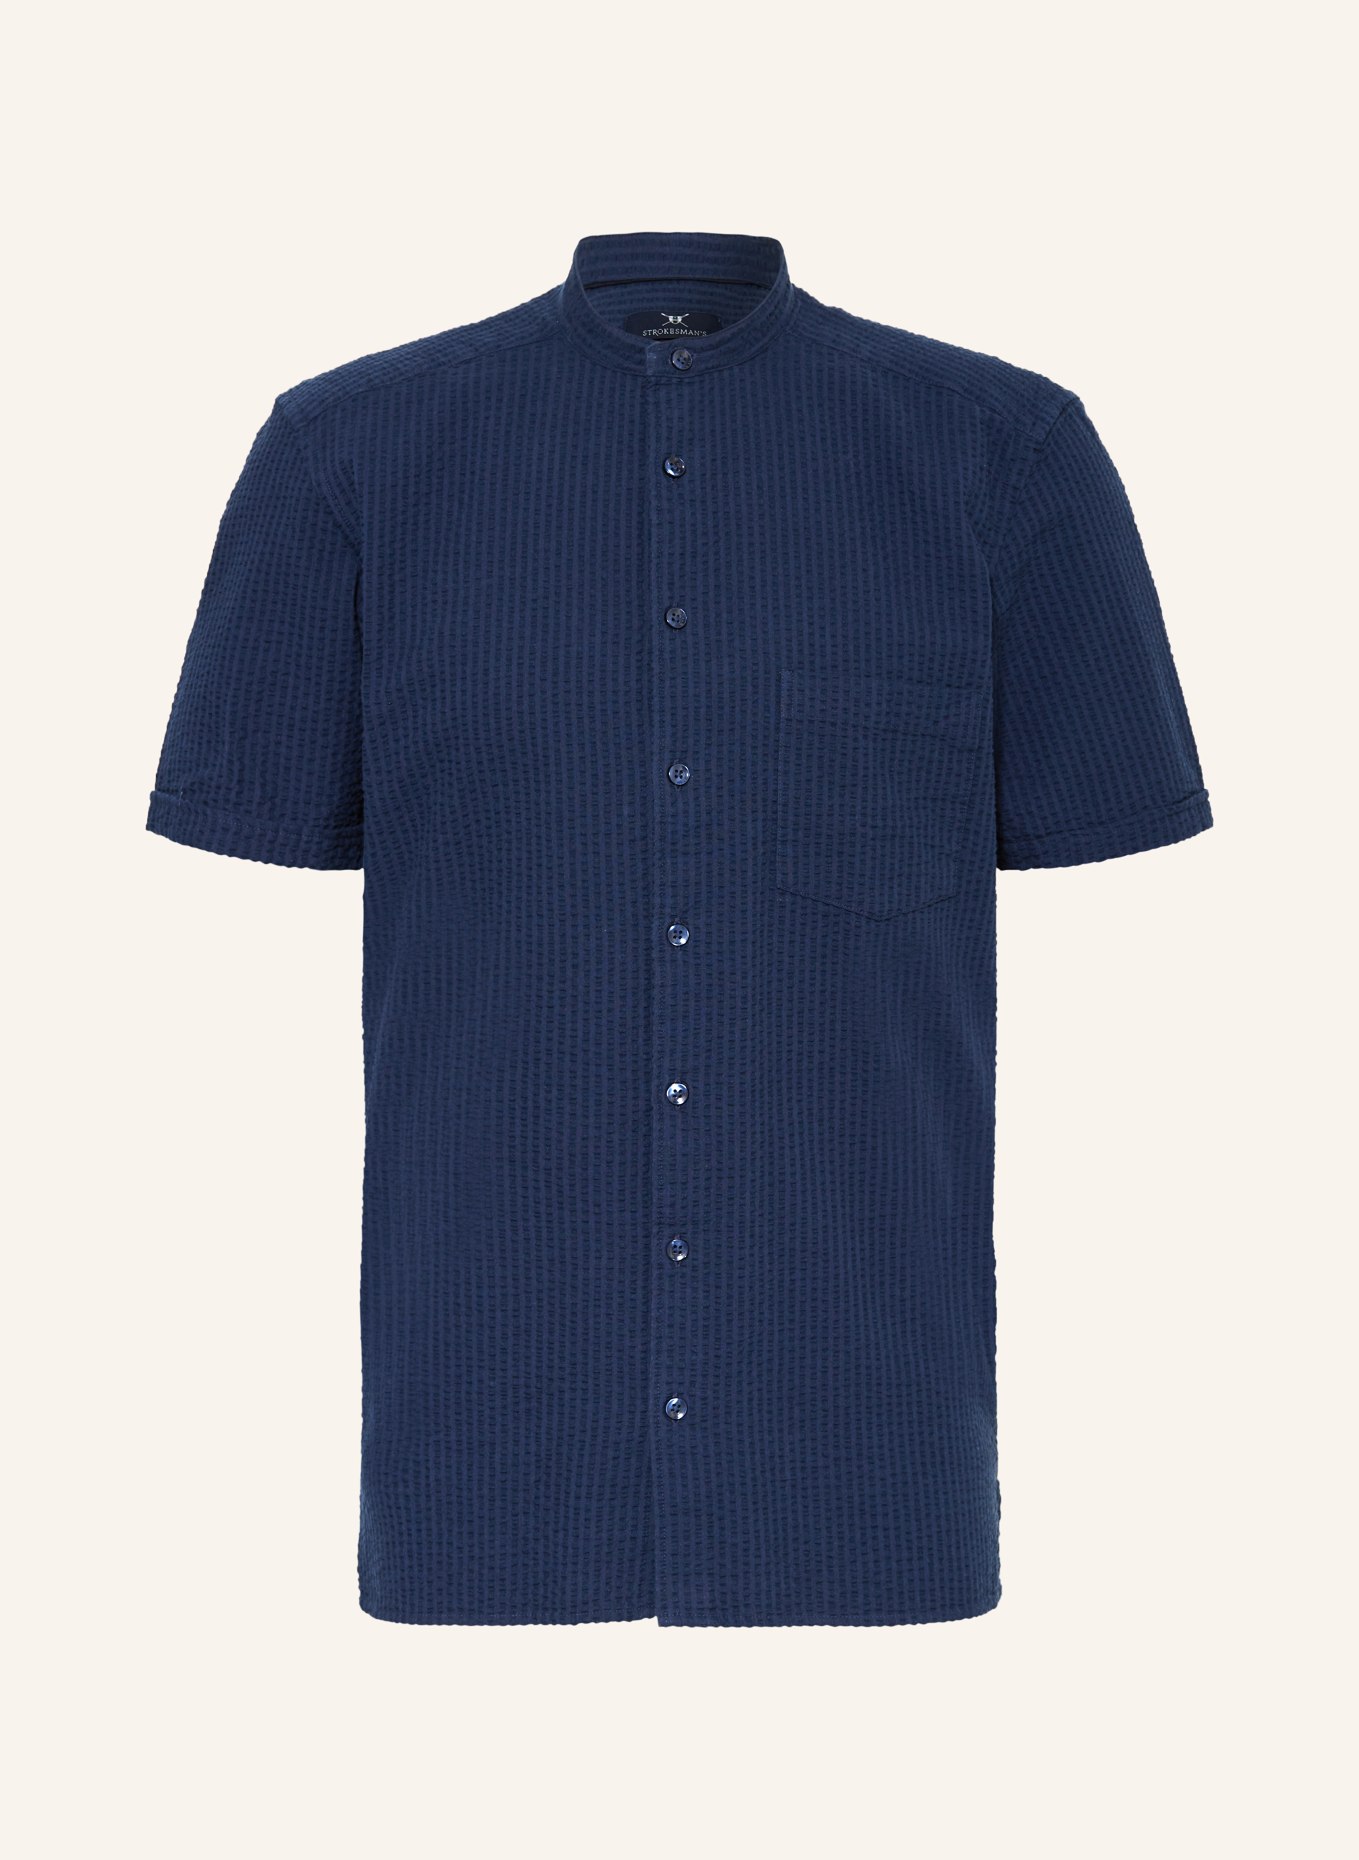 STROKESMAN'S Short sleeve shirt regular fit with stand-up collar, Color: DARK BLUE (Image 1)